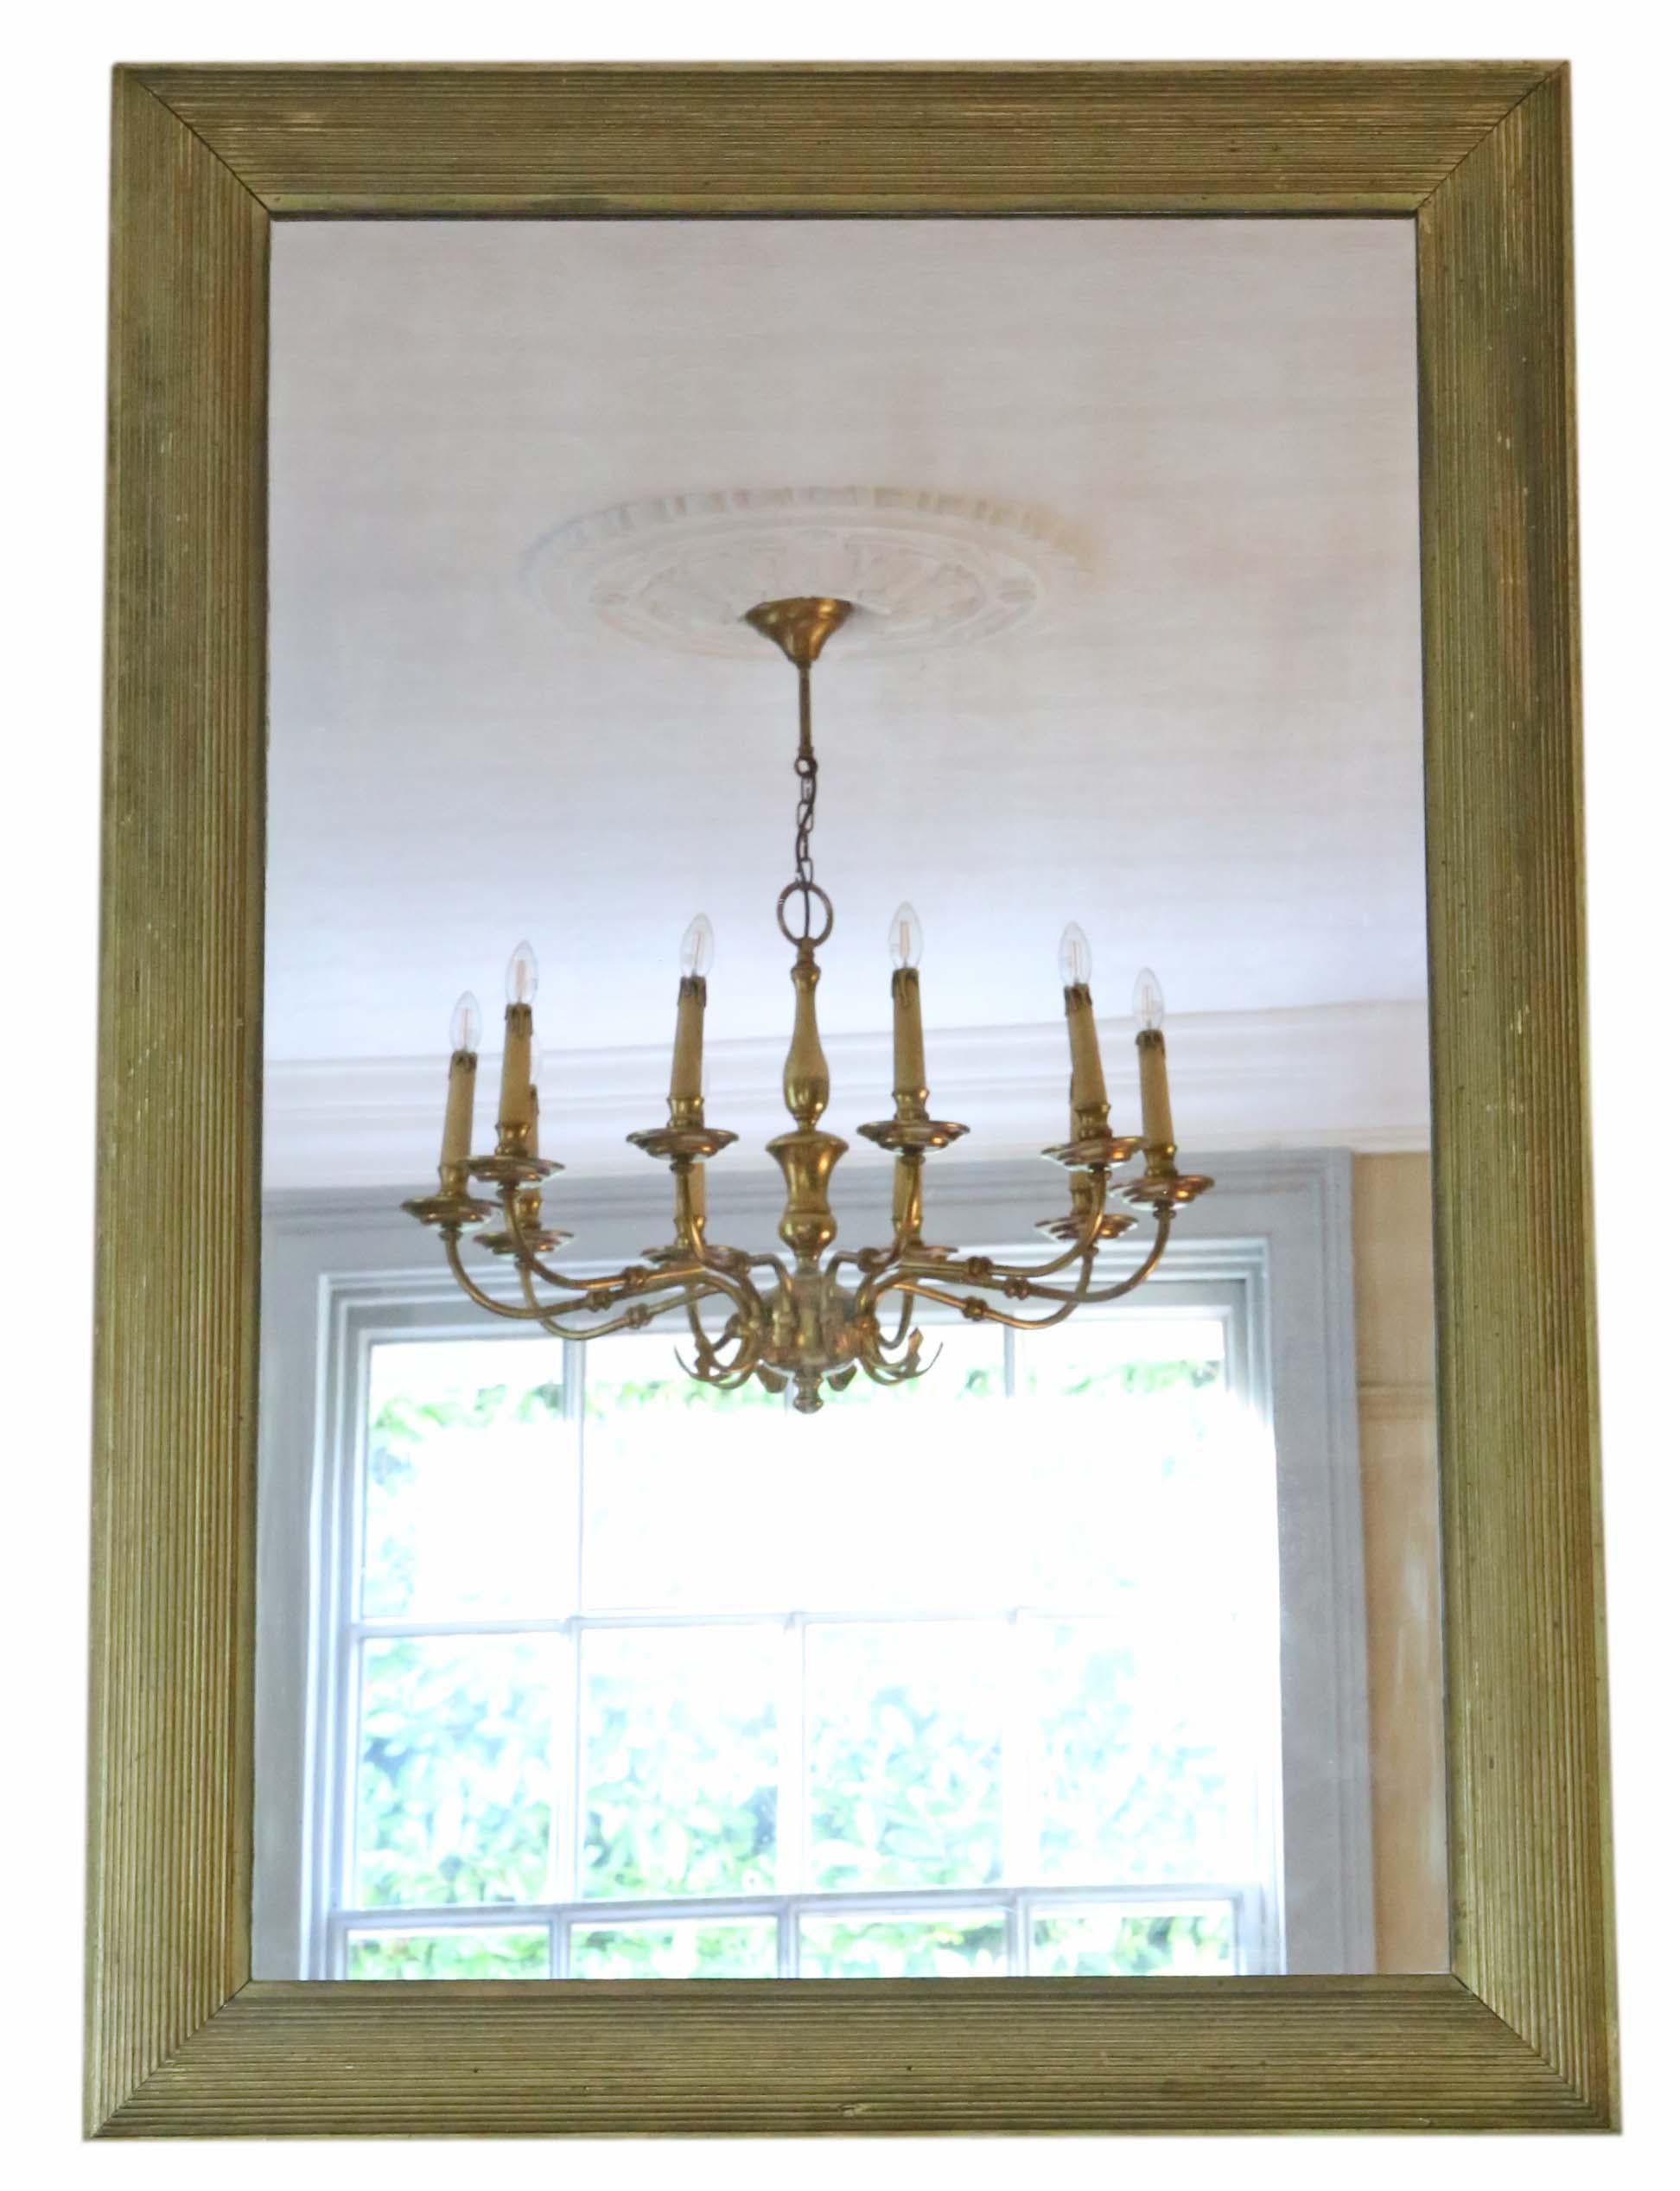 Antique large gilt overmantle or wall mirror from the Art Deco period, dating approximately from 1900-1920. It exudes lovely charm and elegance, featuring its original finish with minor losses and touching up in various areas.

This mirror stands